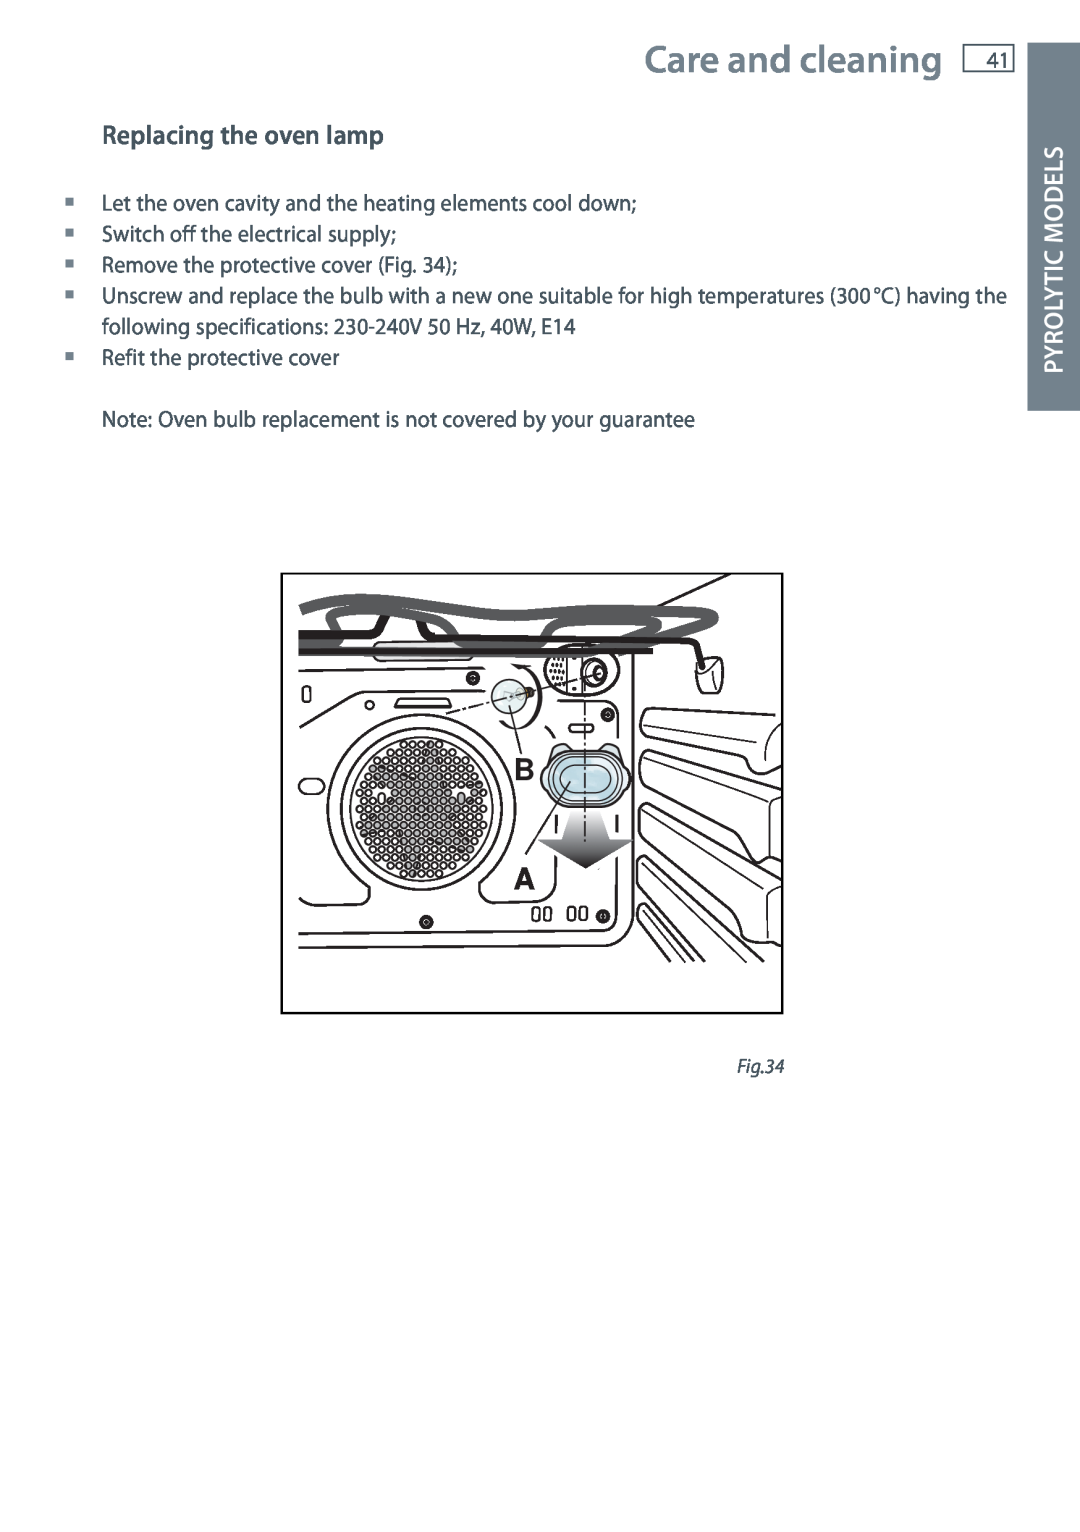 Fisher & Paykel OB60 installation instructions Care and cleaning, Replacing the oven lamp, Pyrolytic Models 